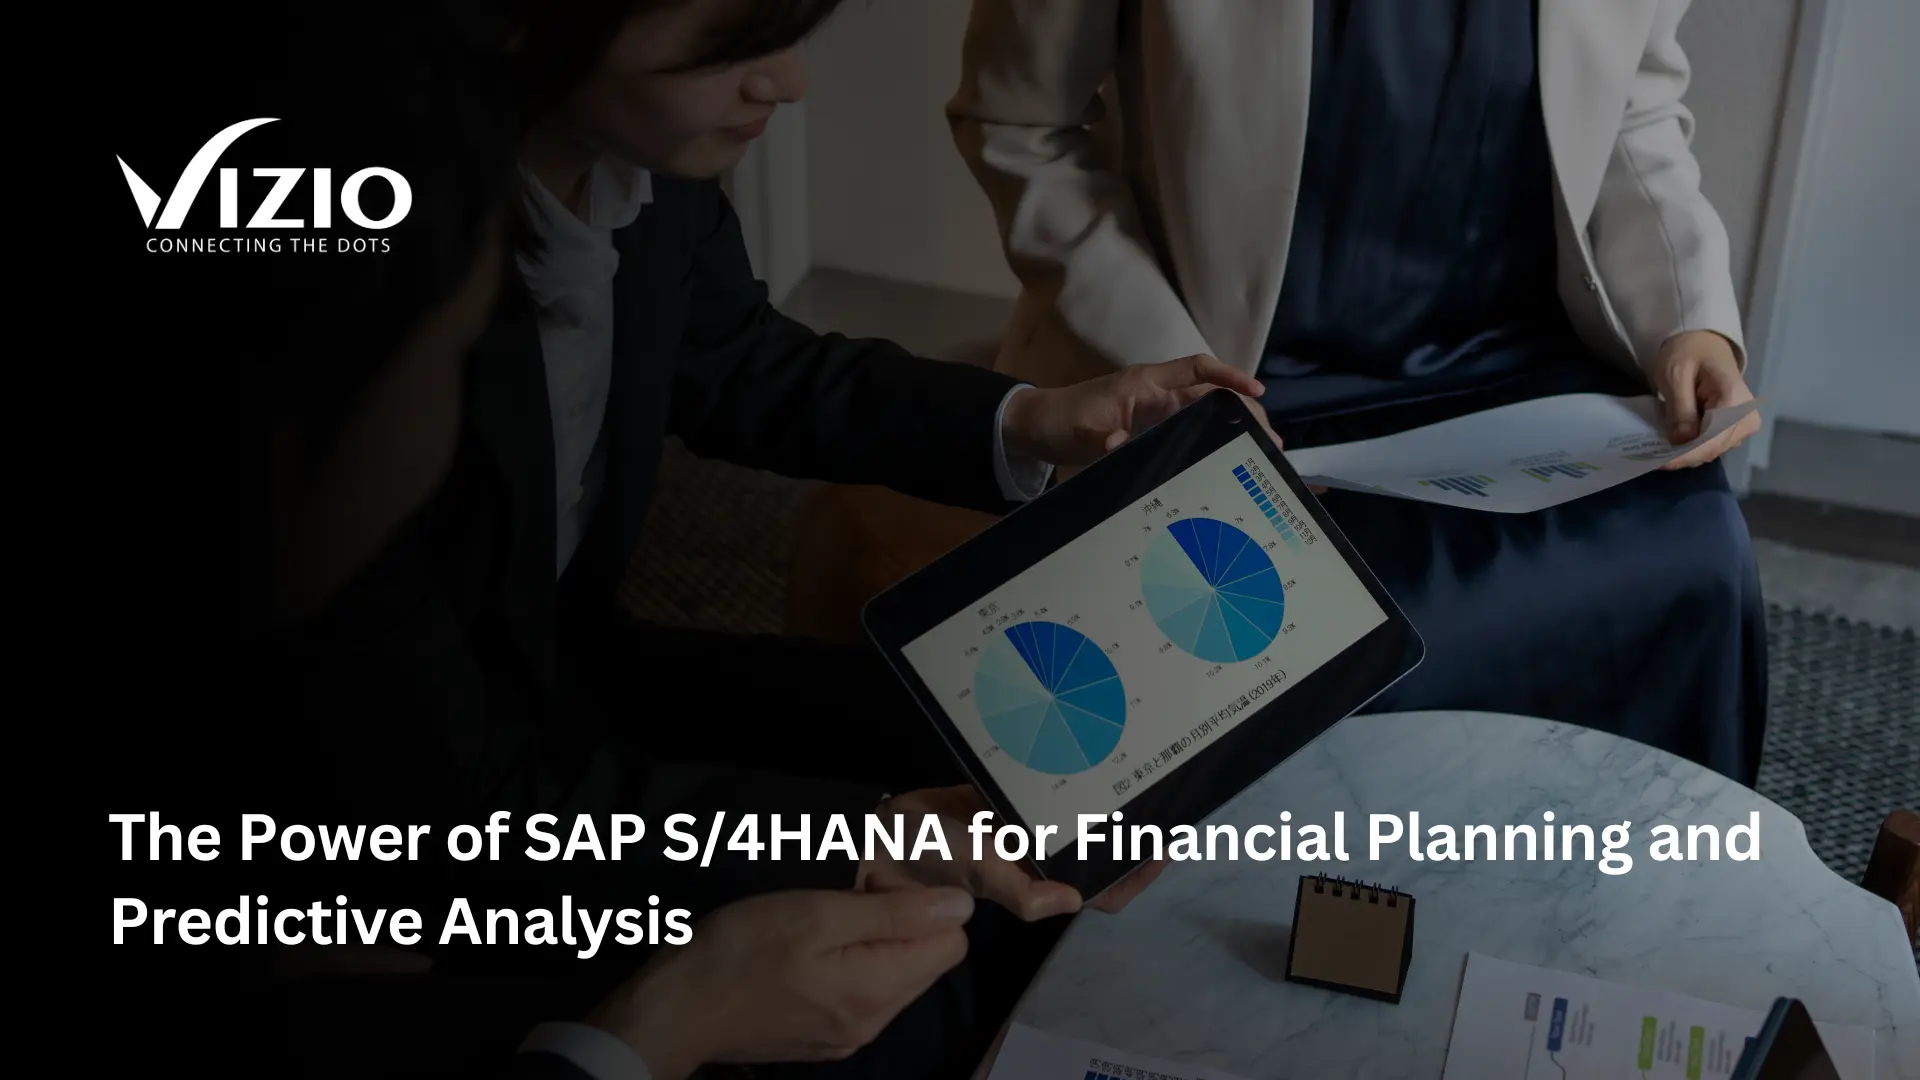 The Power of SAP S/4HANA for Financial Planning & Predictive Analysis